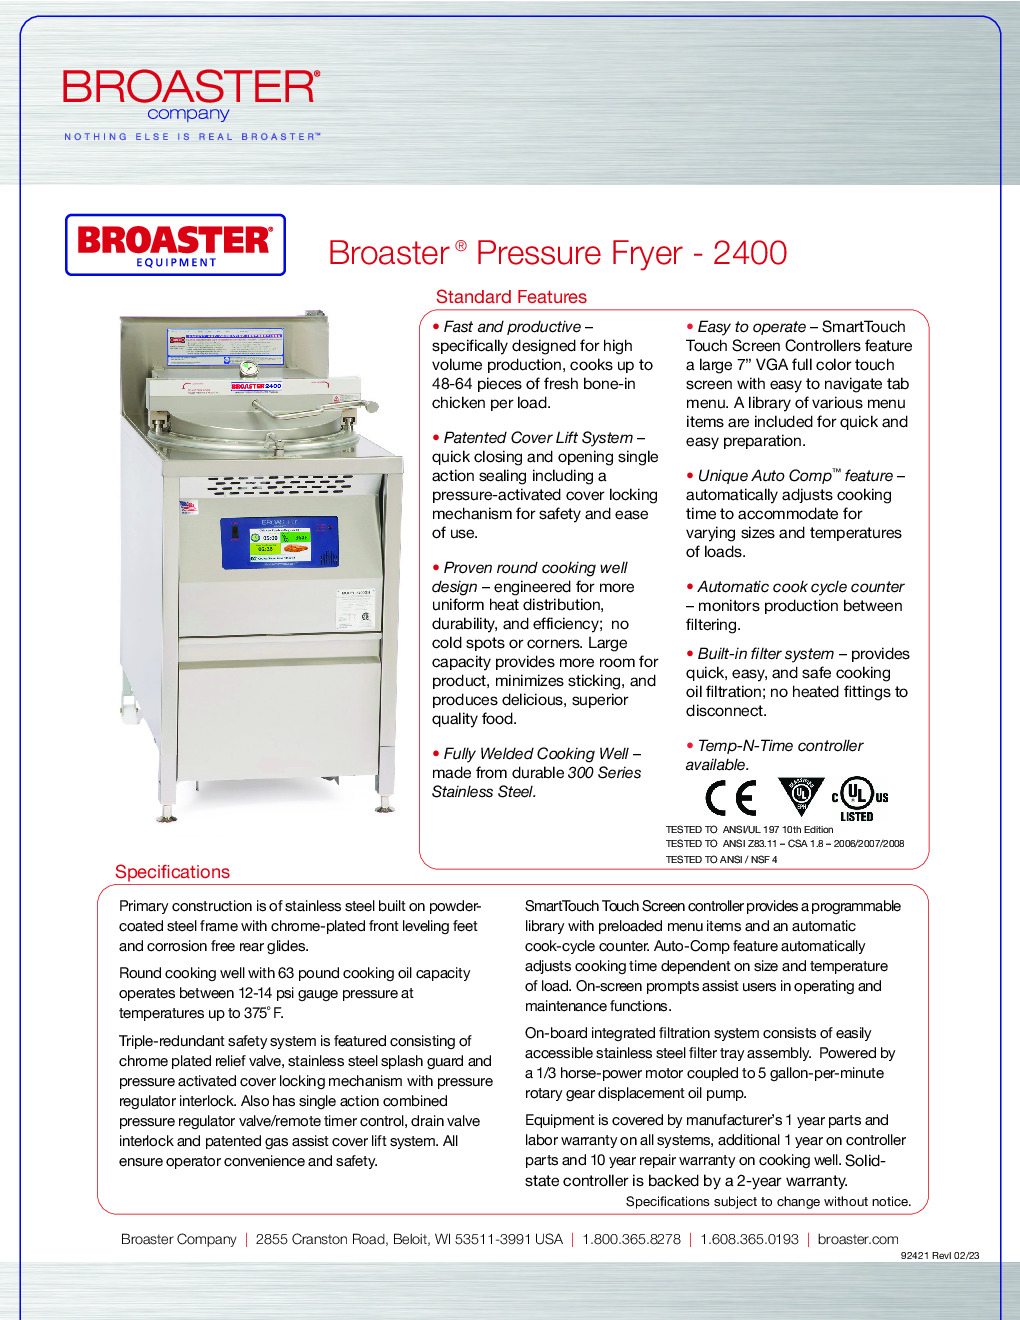 Broaster 86018 2400 Series Electric Pressure Fryer w/ SmartTouch Controller, Built-in Filter at Chef's Deal